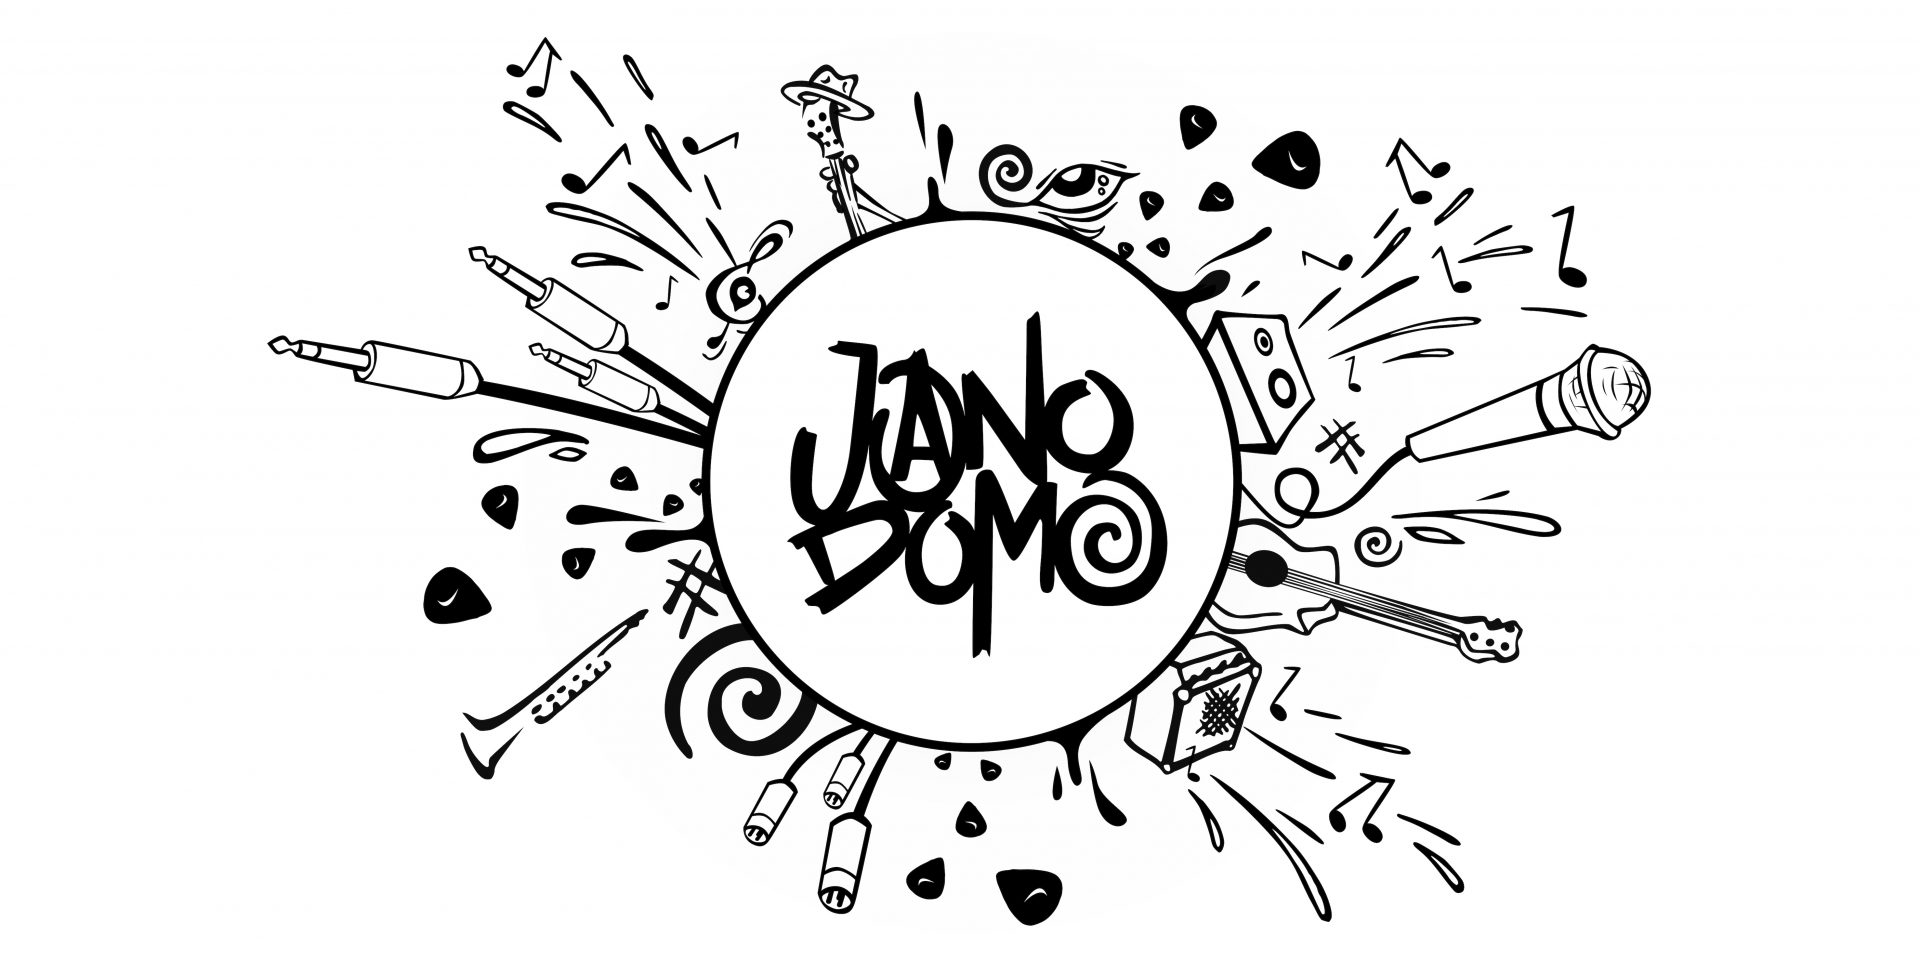 Jano Domo Musik Keyvisual, Bannerartwork, designed by Hans From Space